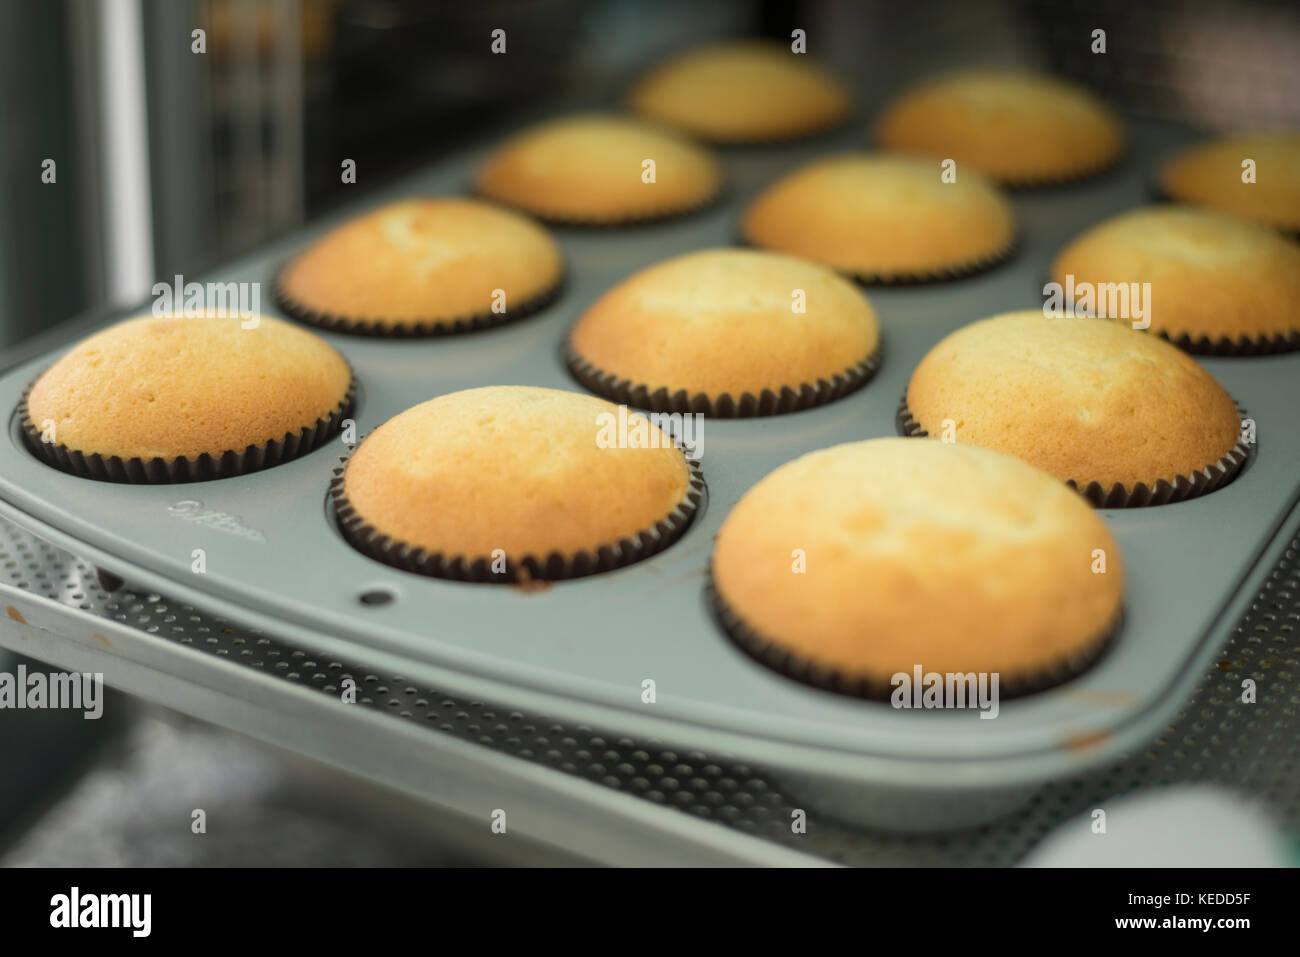 Cupcakes coming out of the oven Stock Photo